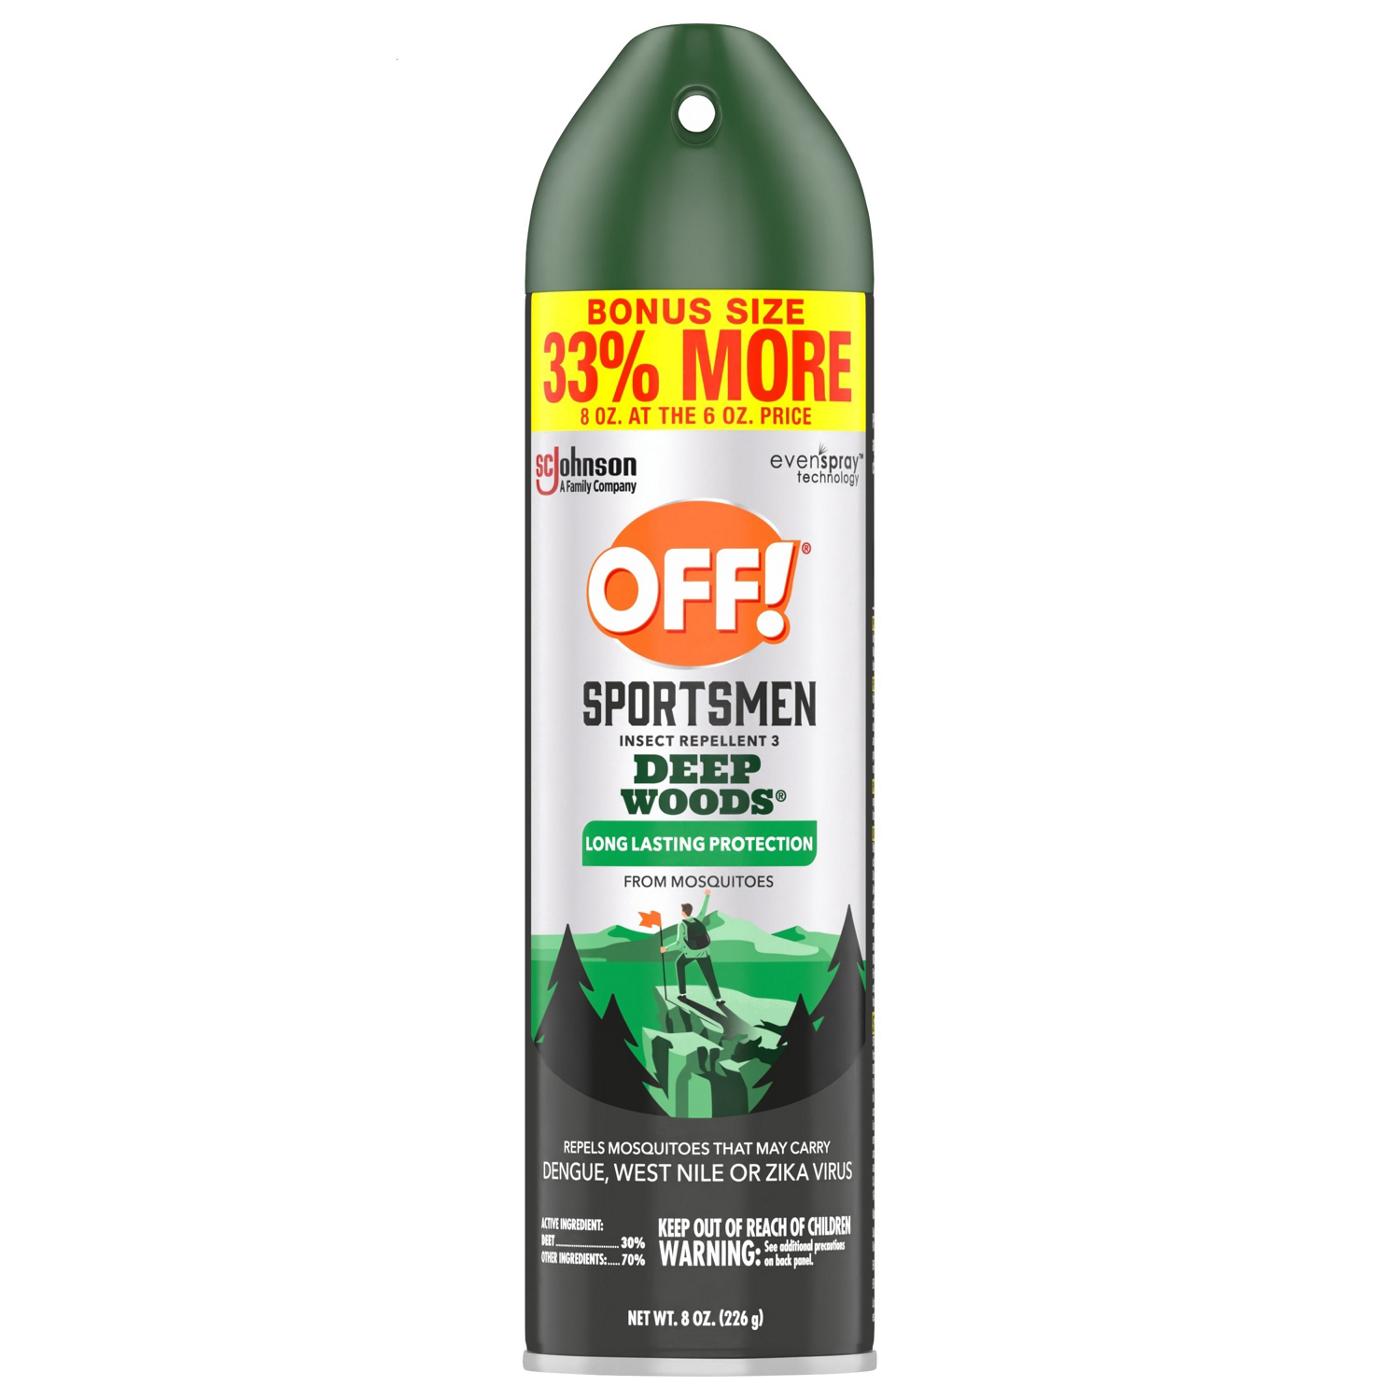 Off! Sportsmen Deep Woods Insect Repellent 3; image 1 of 2